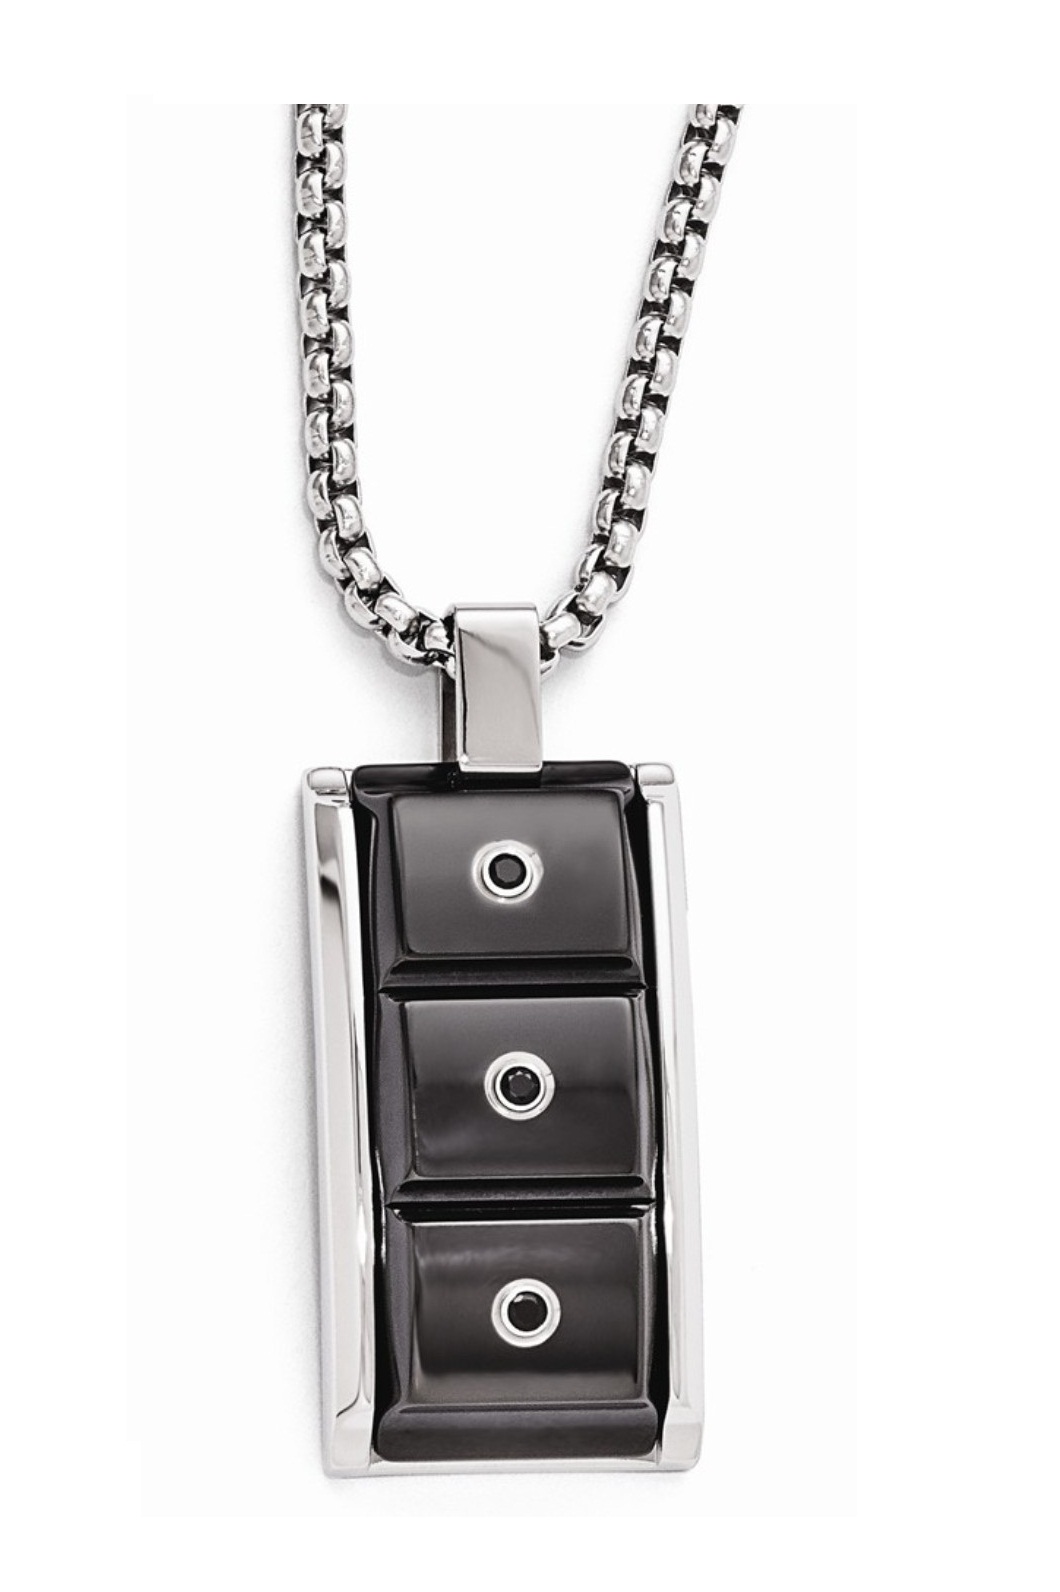  Black Ti And Black Spinel With Sterling Silver Bezel Pendant Necklace
